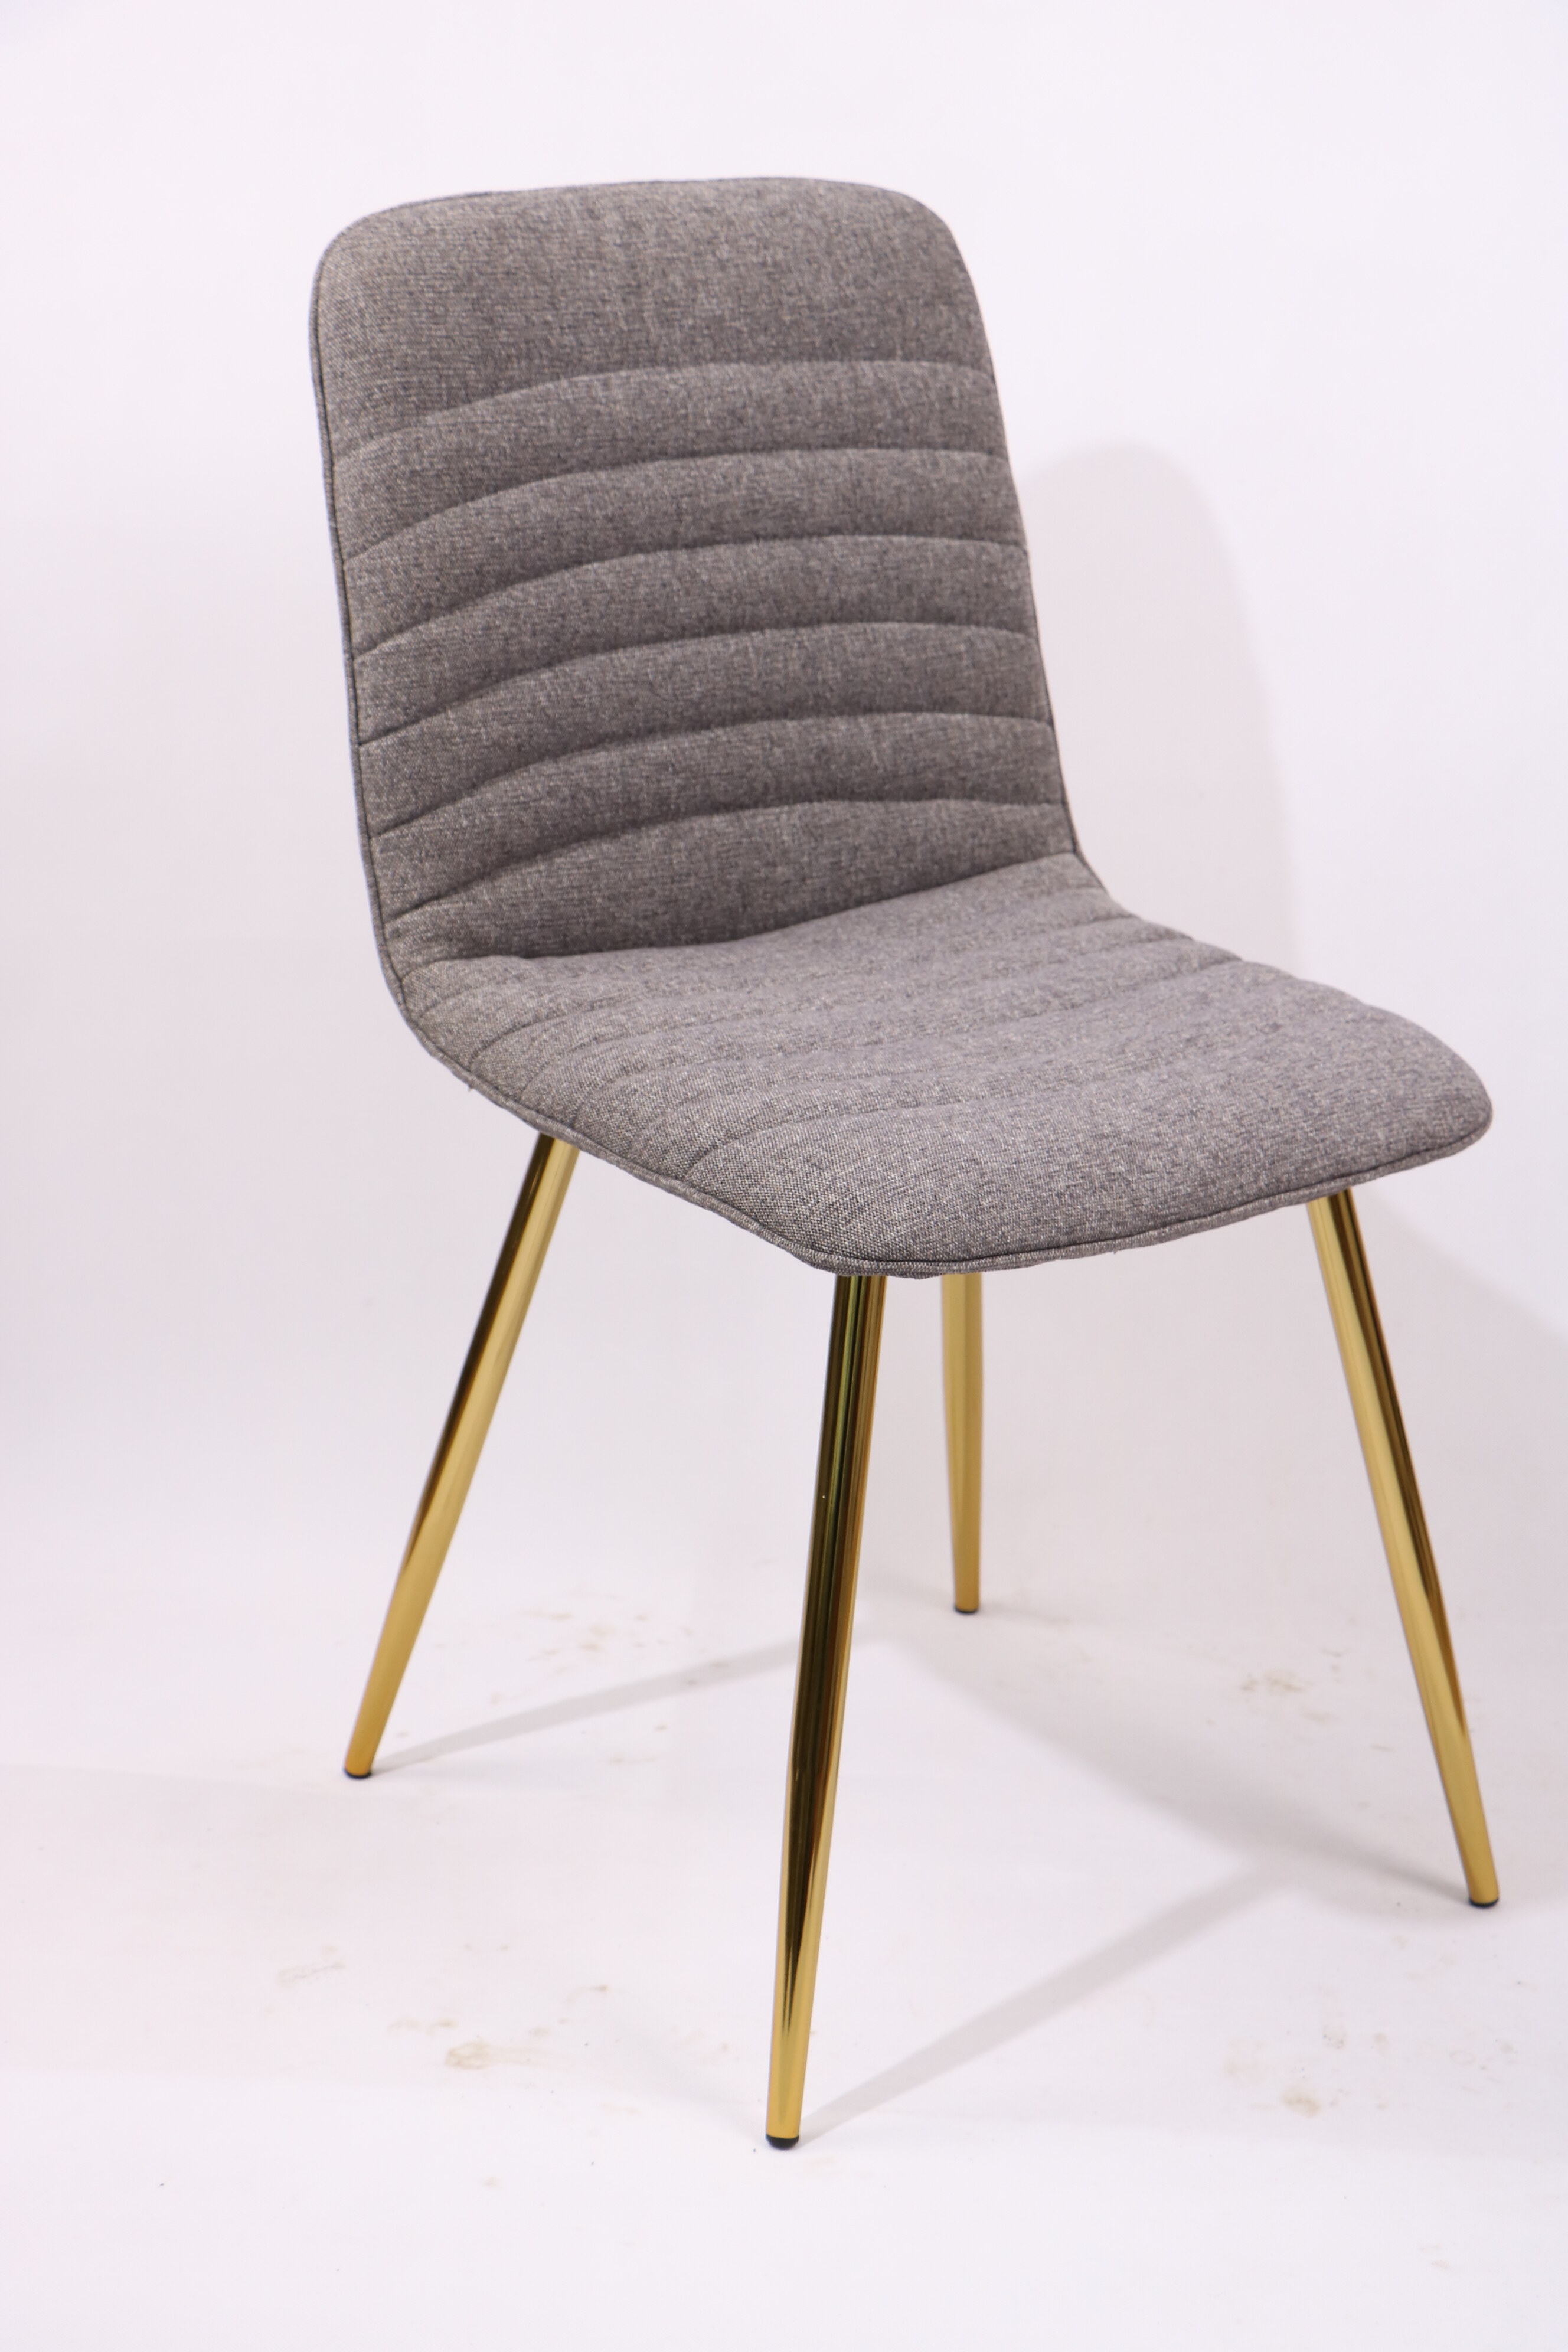 oem dining chair, wholesale dining chair